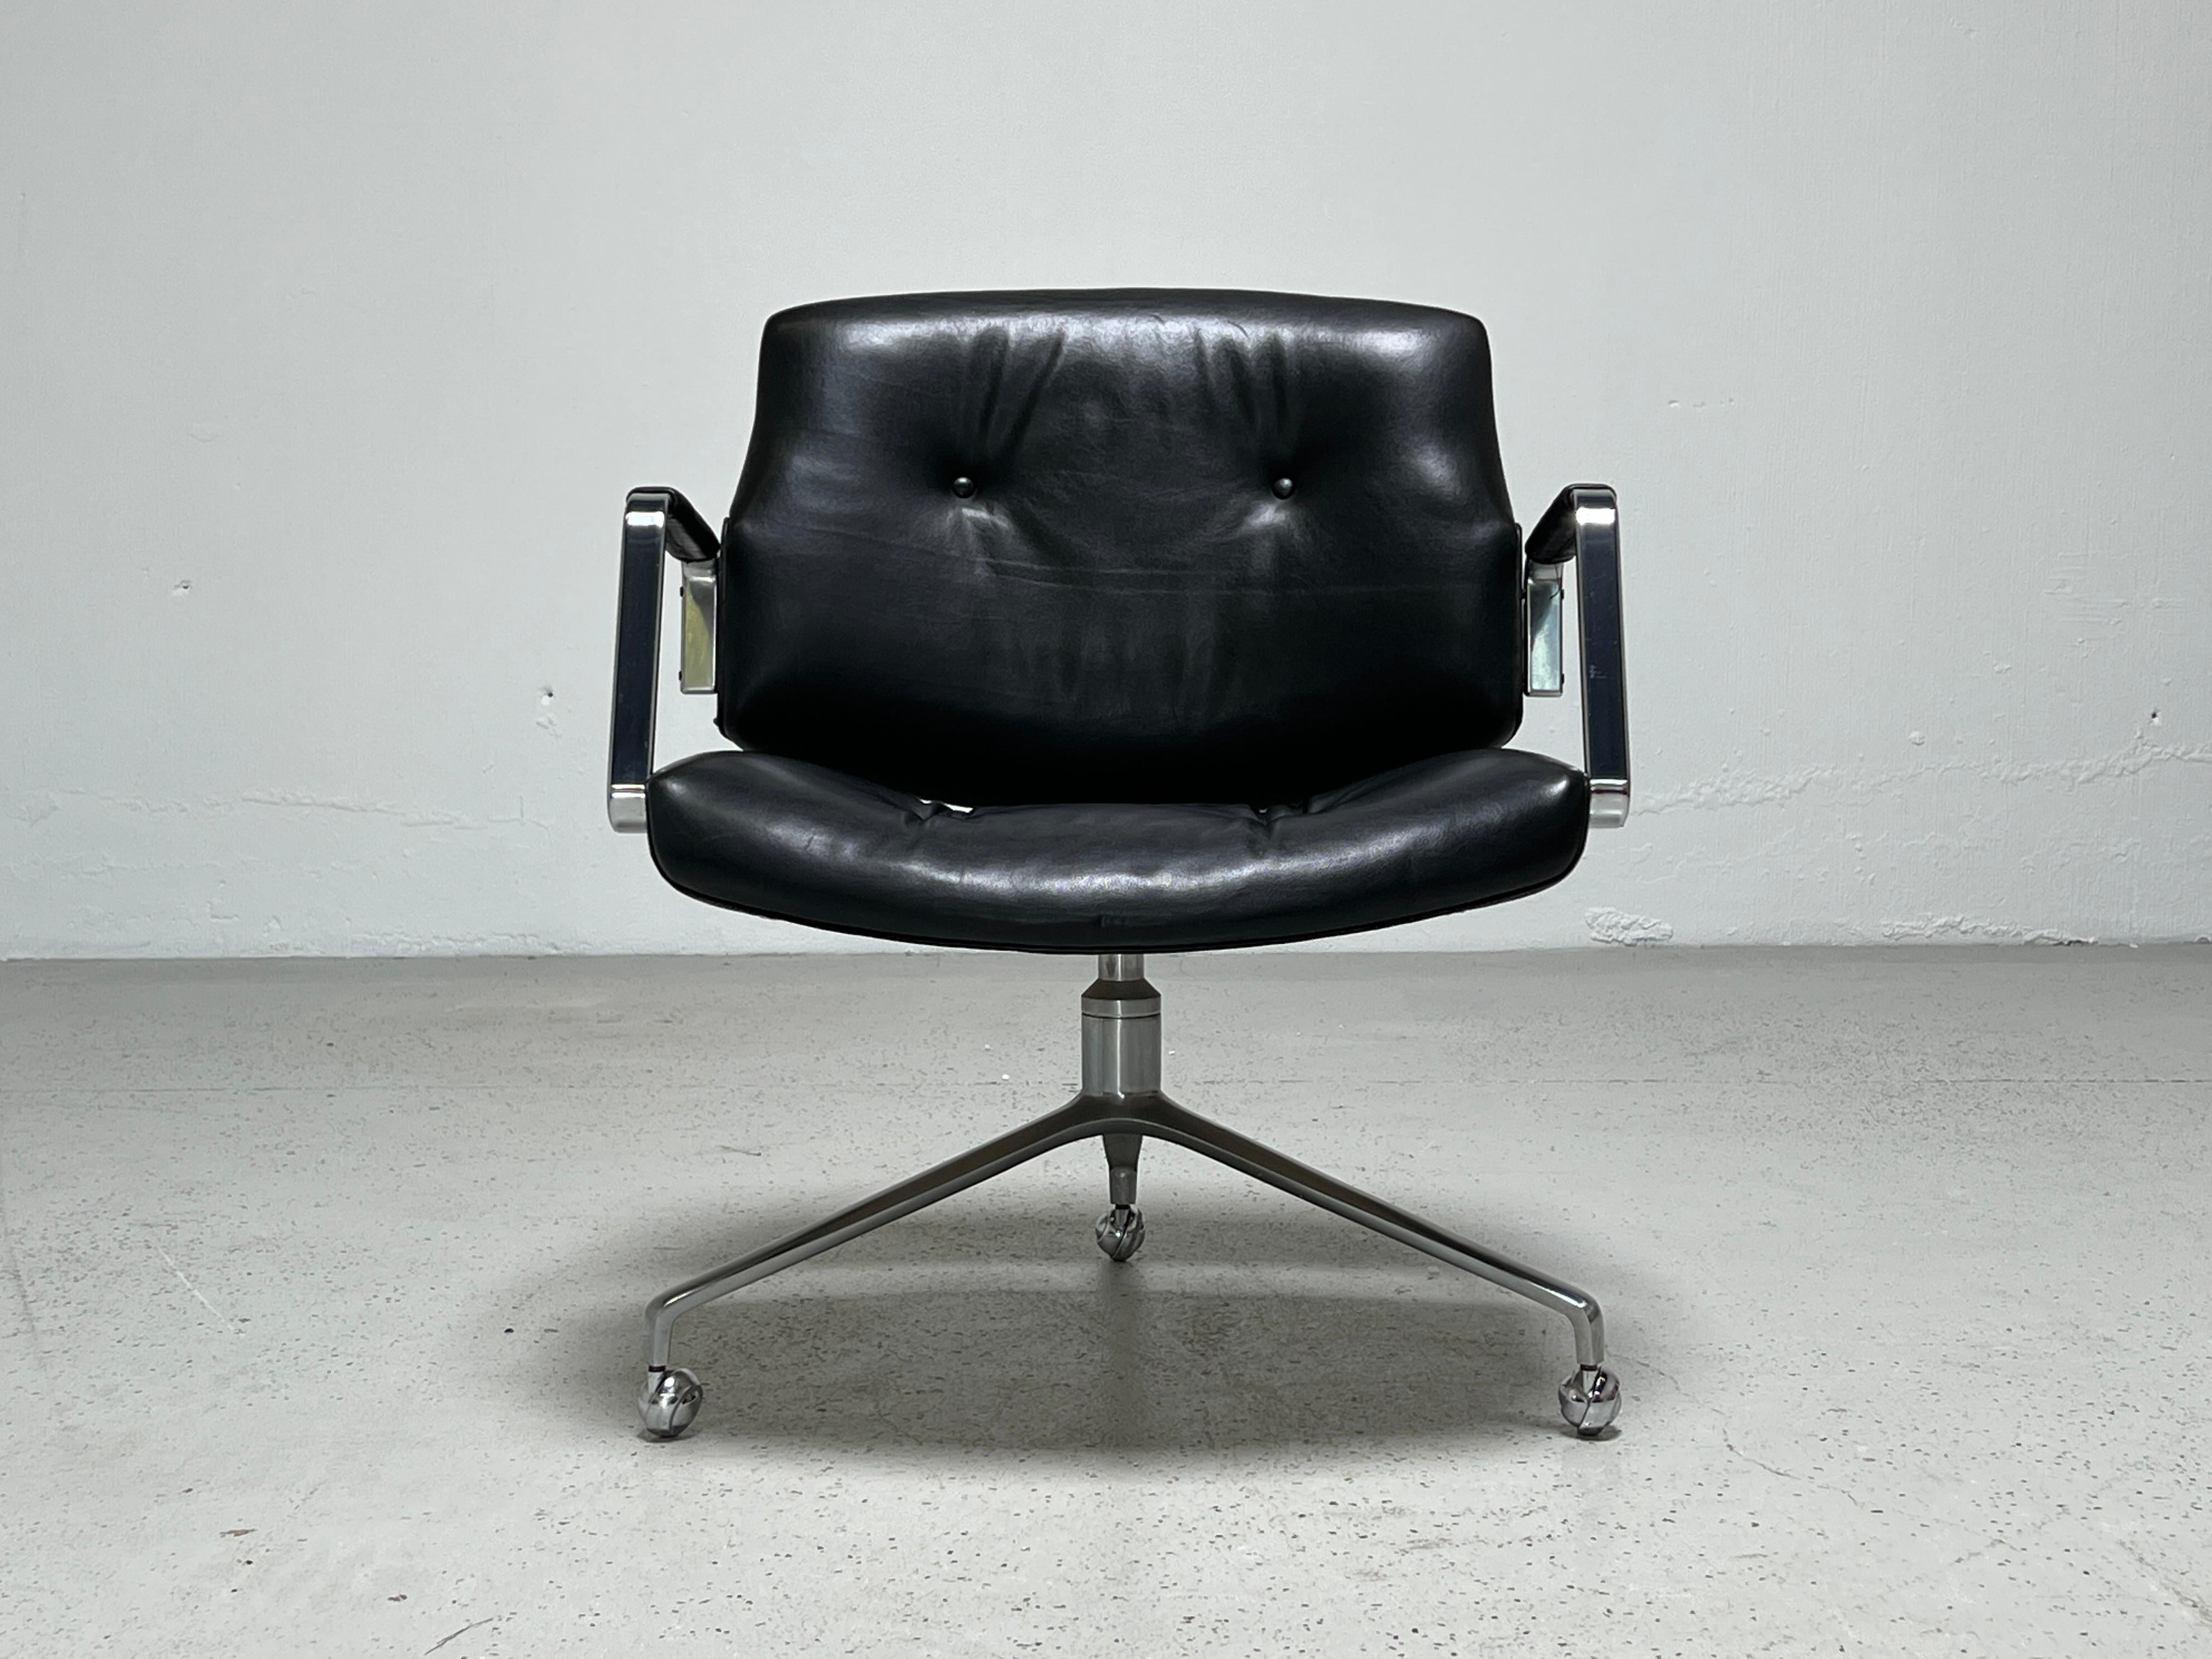 Desk chair Model FK84 by Preben Fabricius & Jørgen Kastholm for Kill International, 1962. Early production with cantilevering back rest in black leather on a three star chrome-plated base. Pair of matching swivel chairs also available.